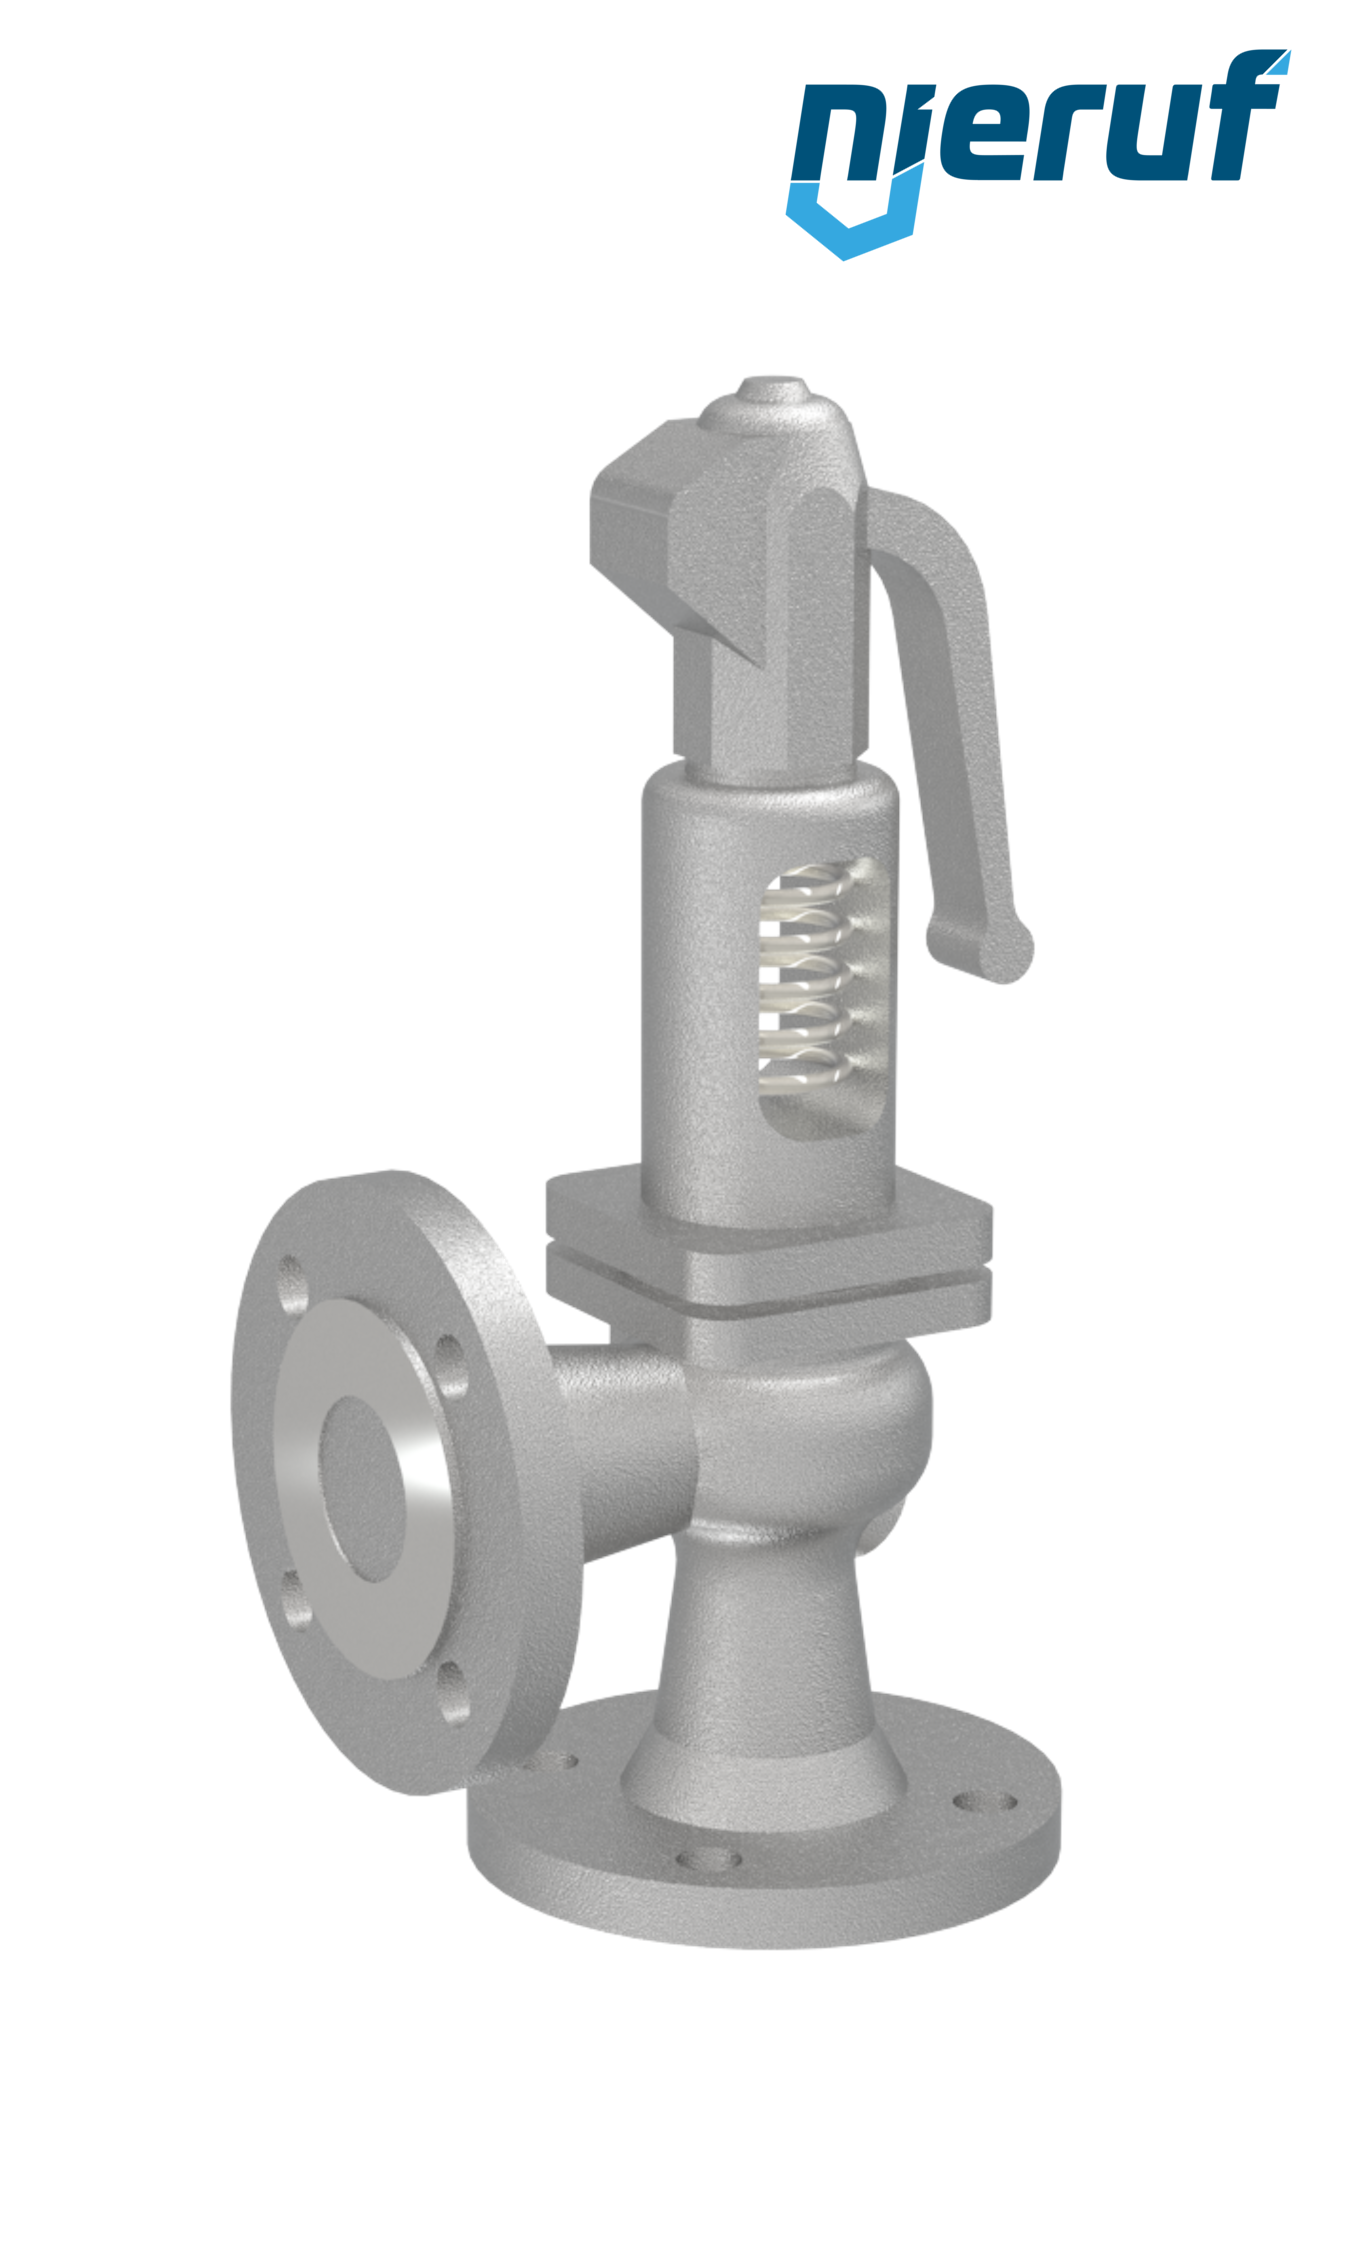 flange-safety valve DN100/DN100 SF0202, cast steel EPDM, with lever